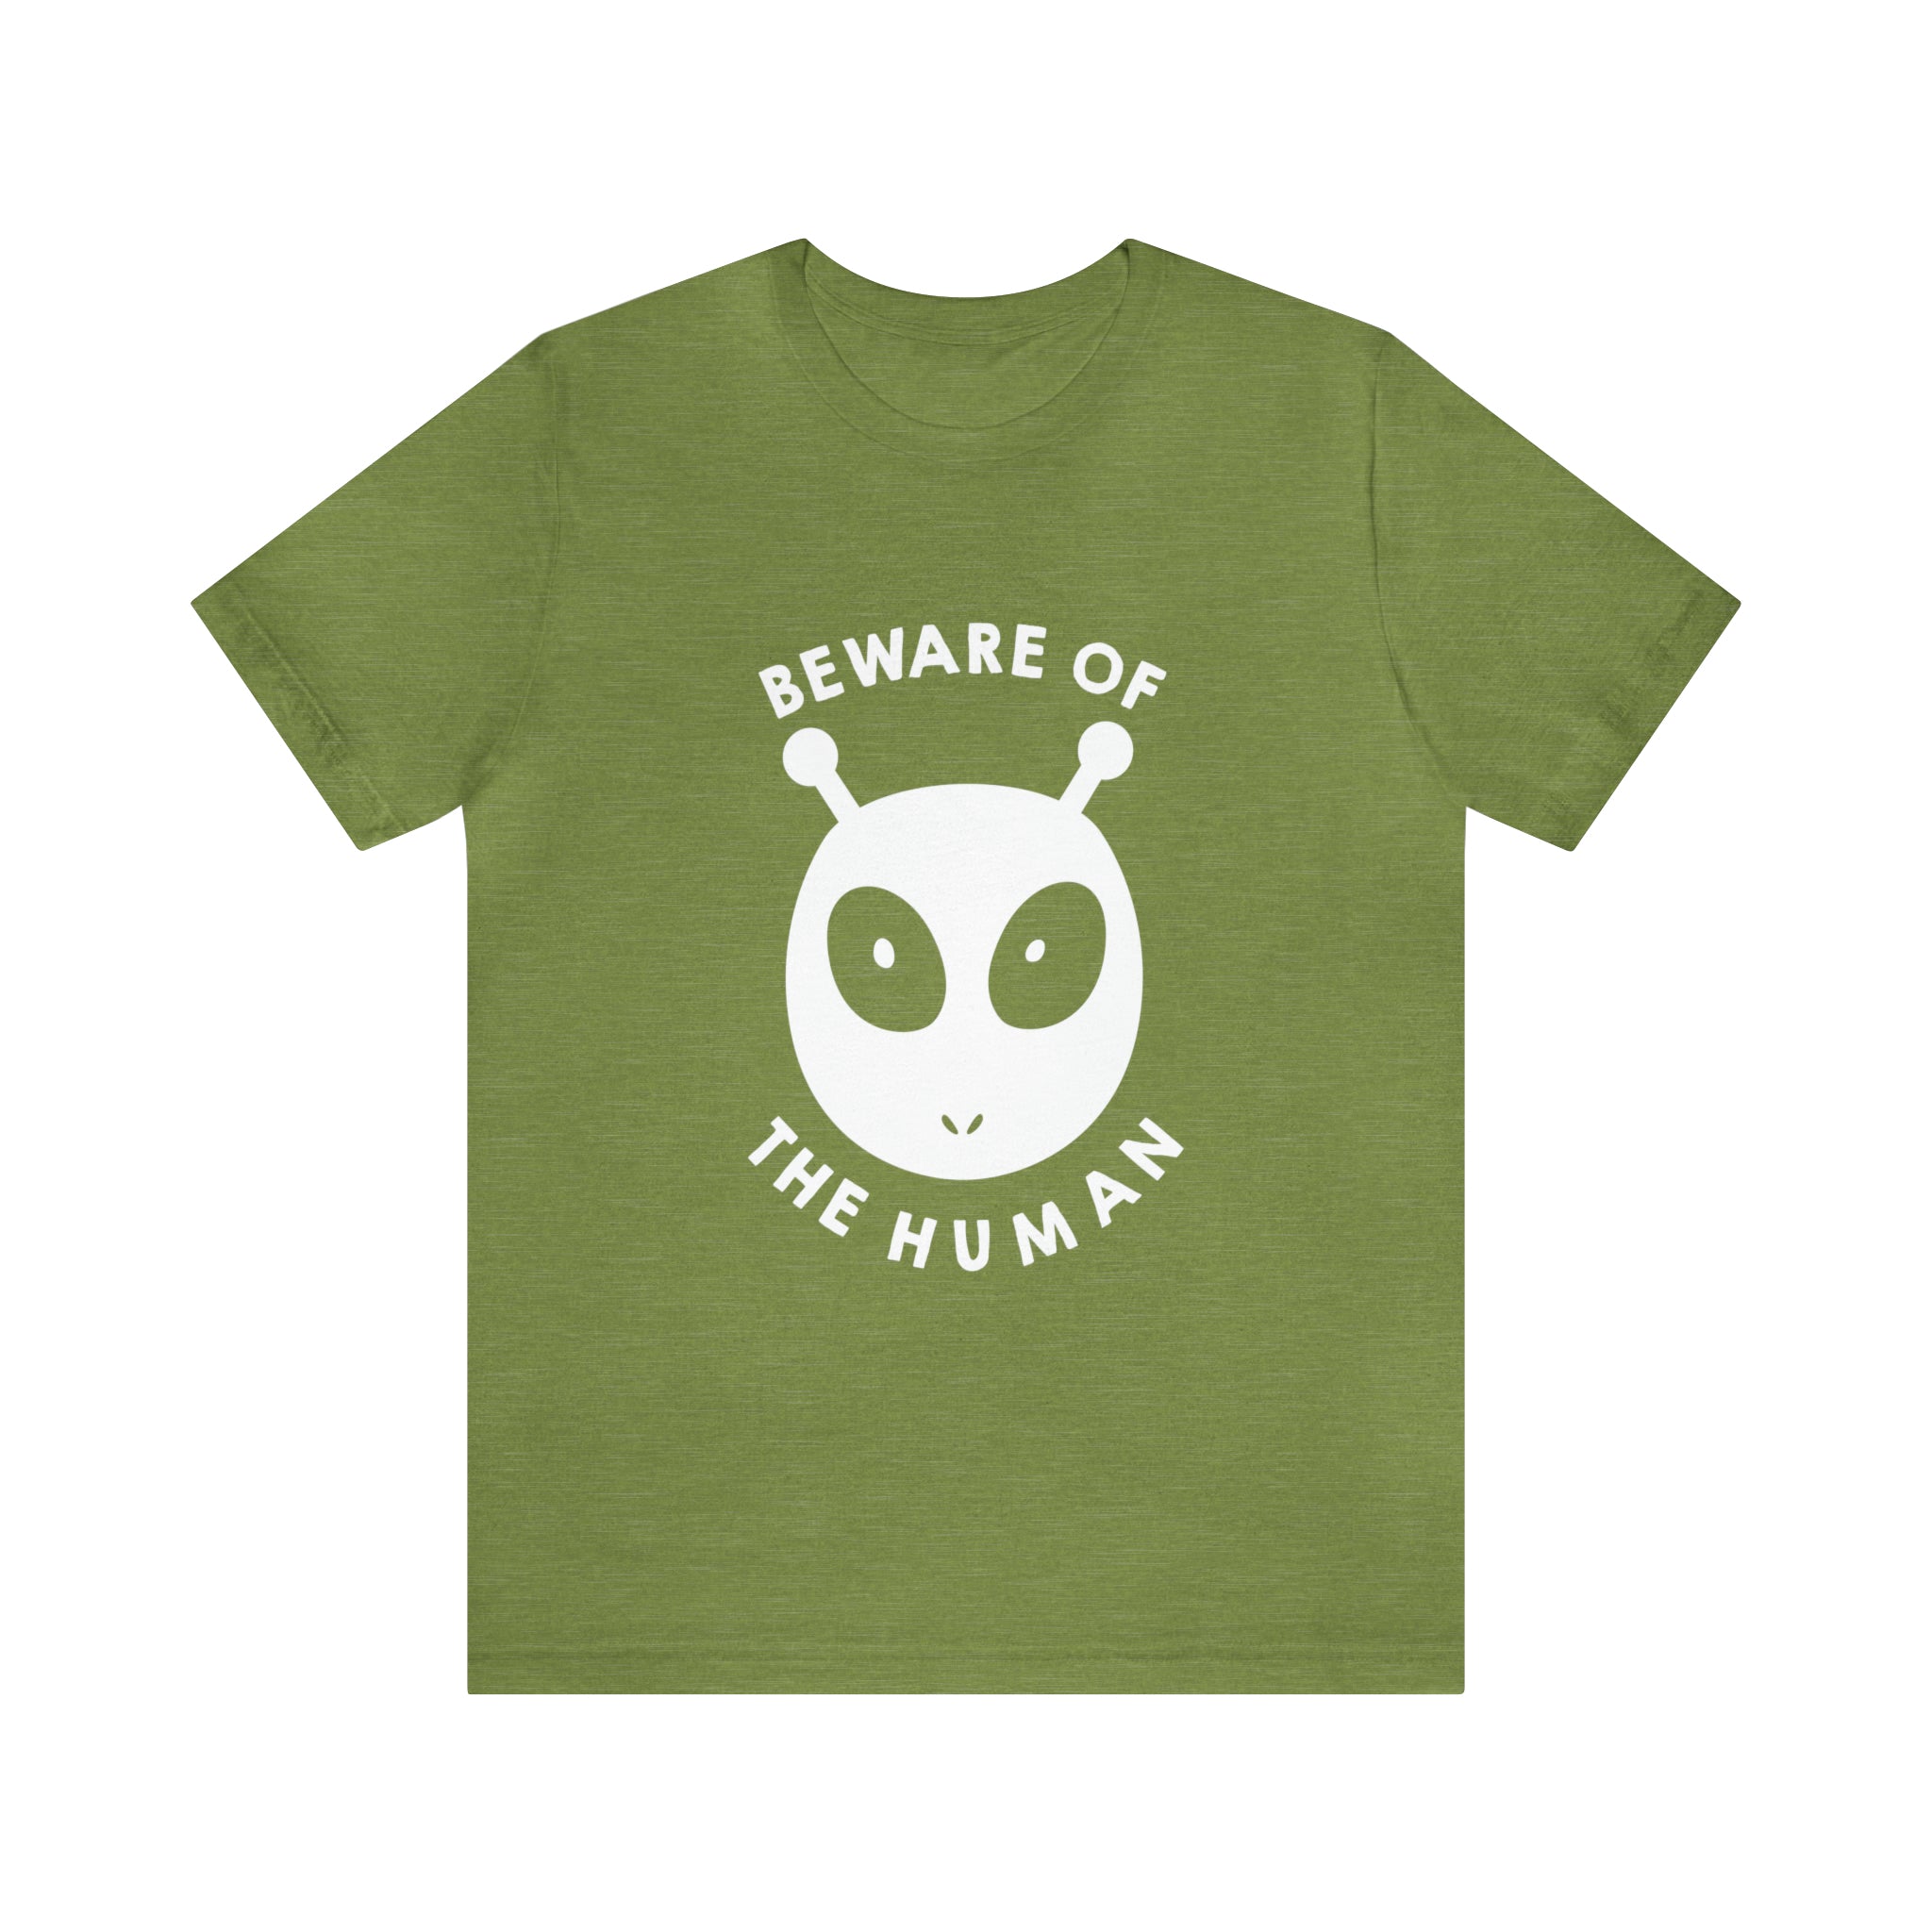 A Printify Beware of the humans T-Shirt.